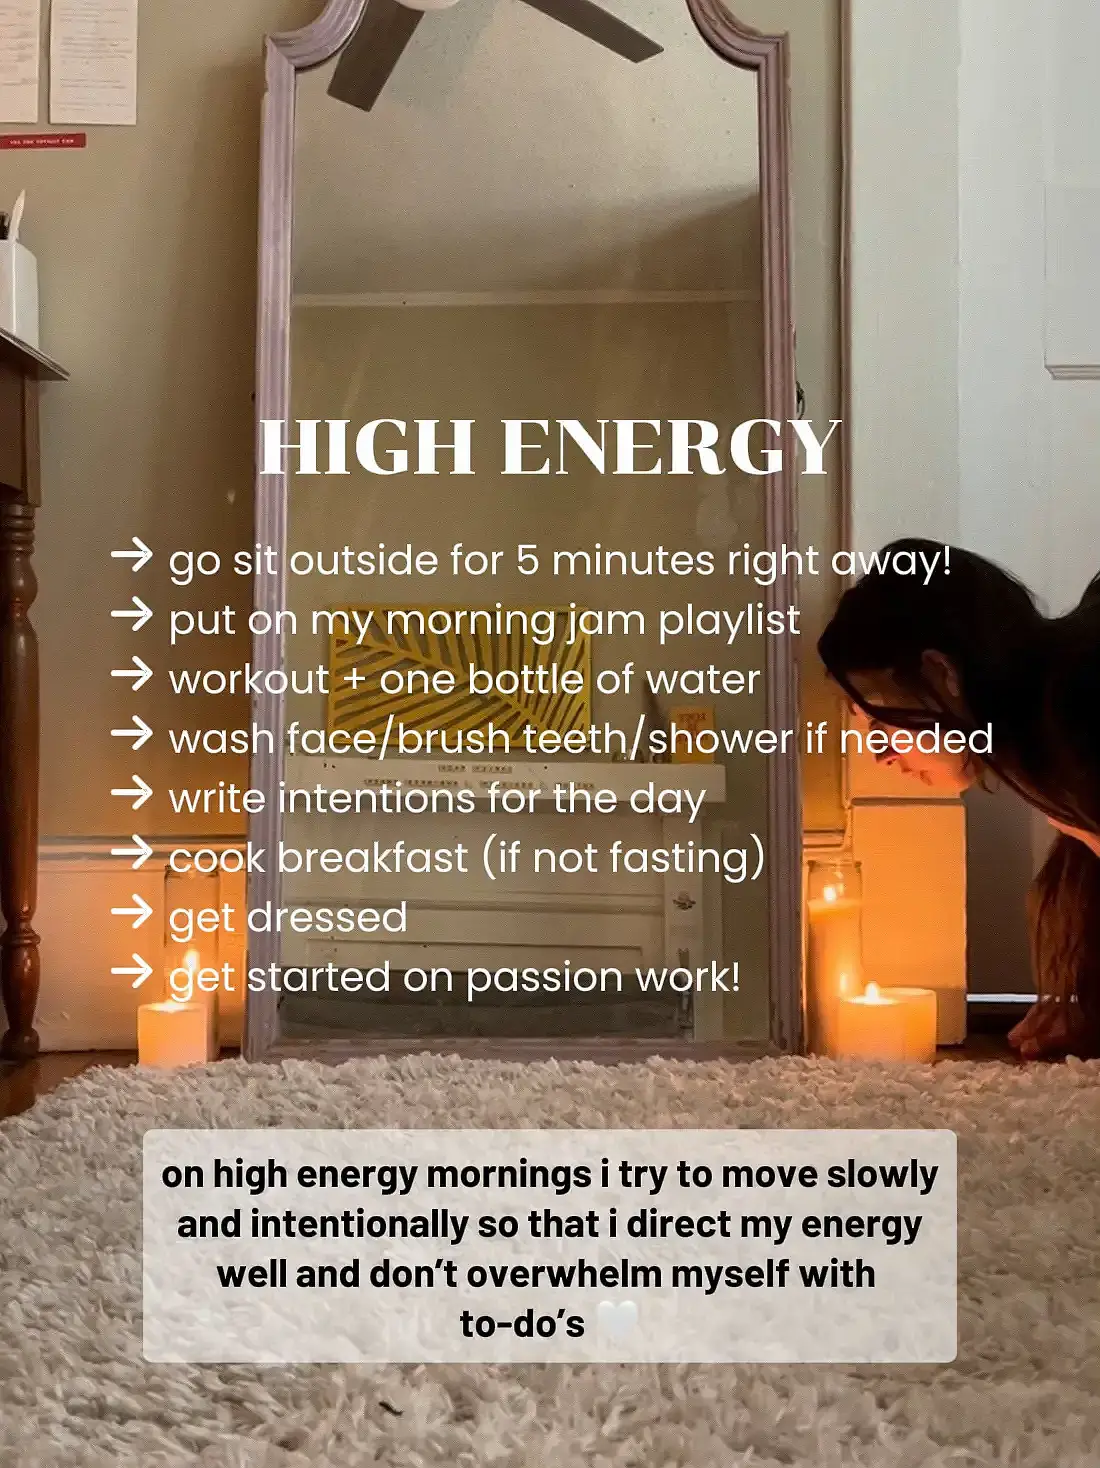 Start Your Day with an Energizing Morning Workout